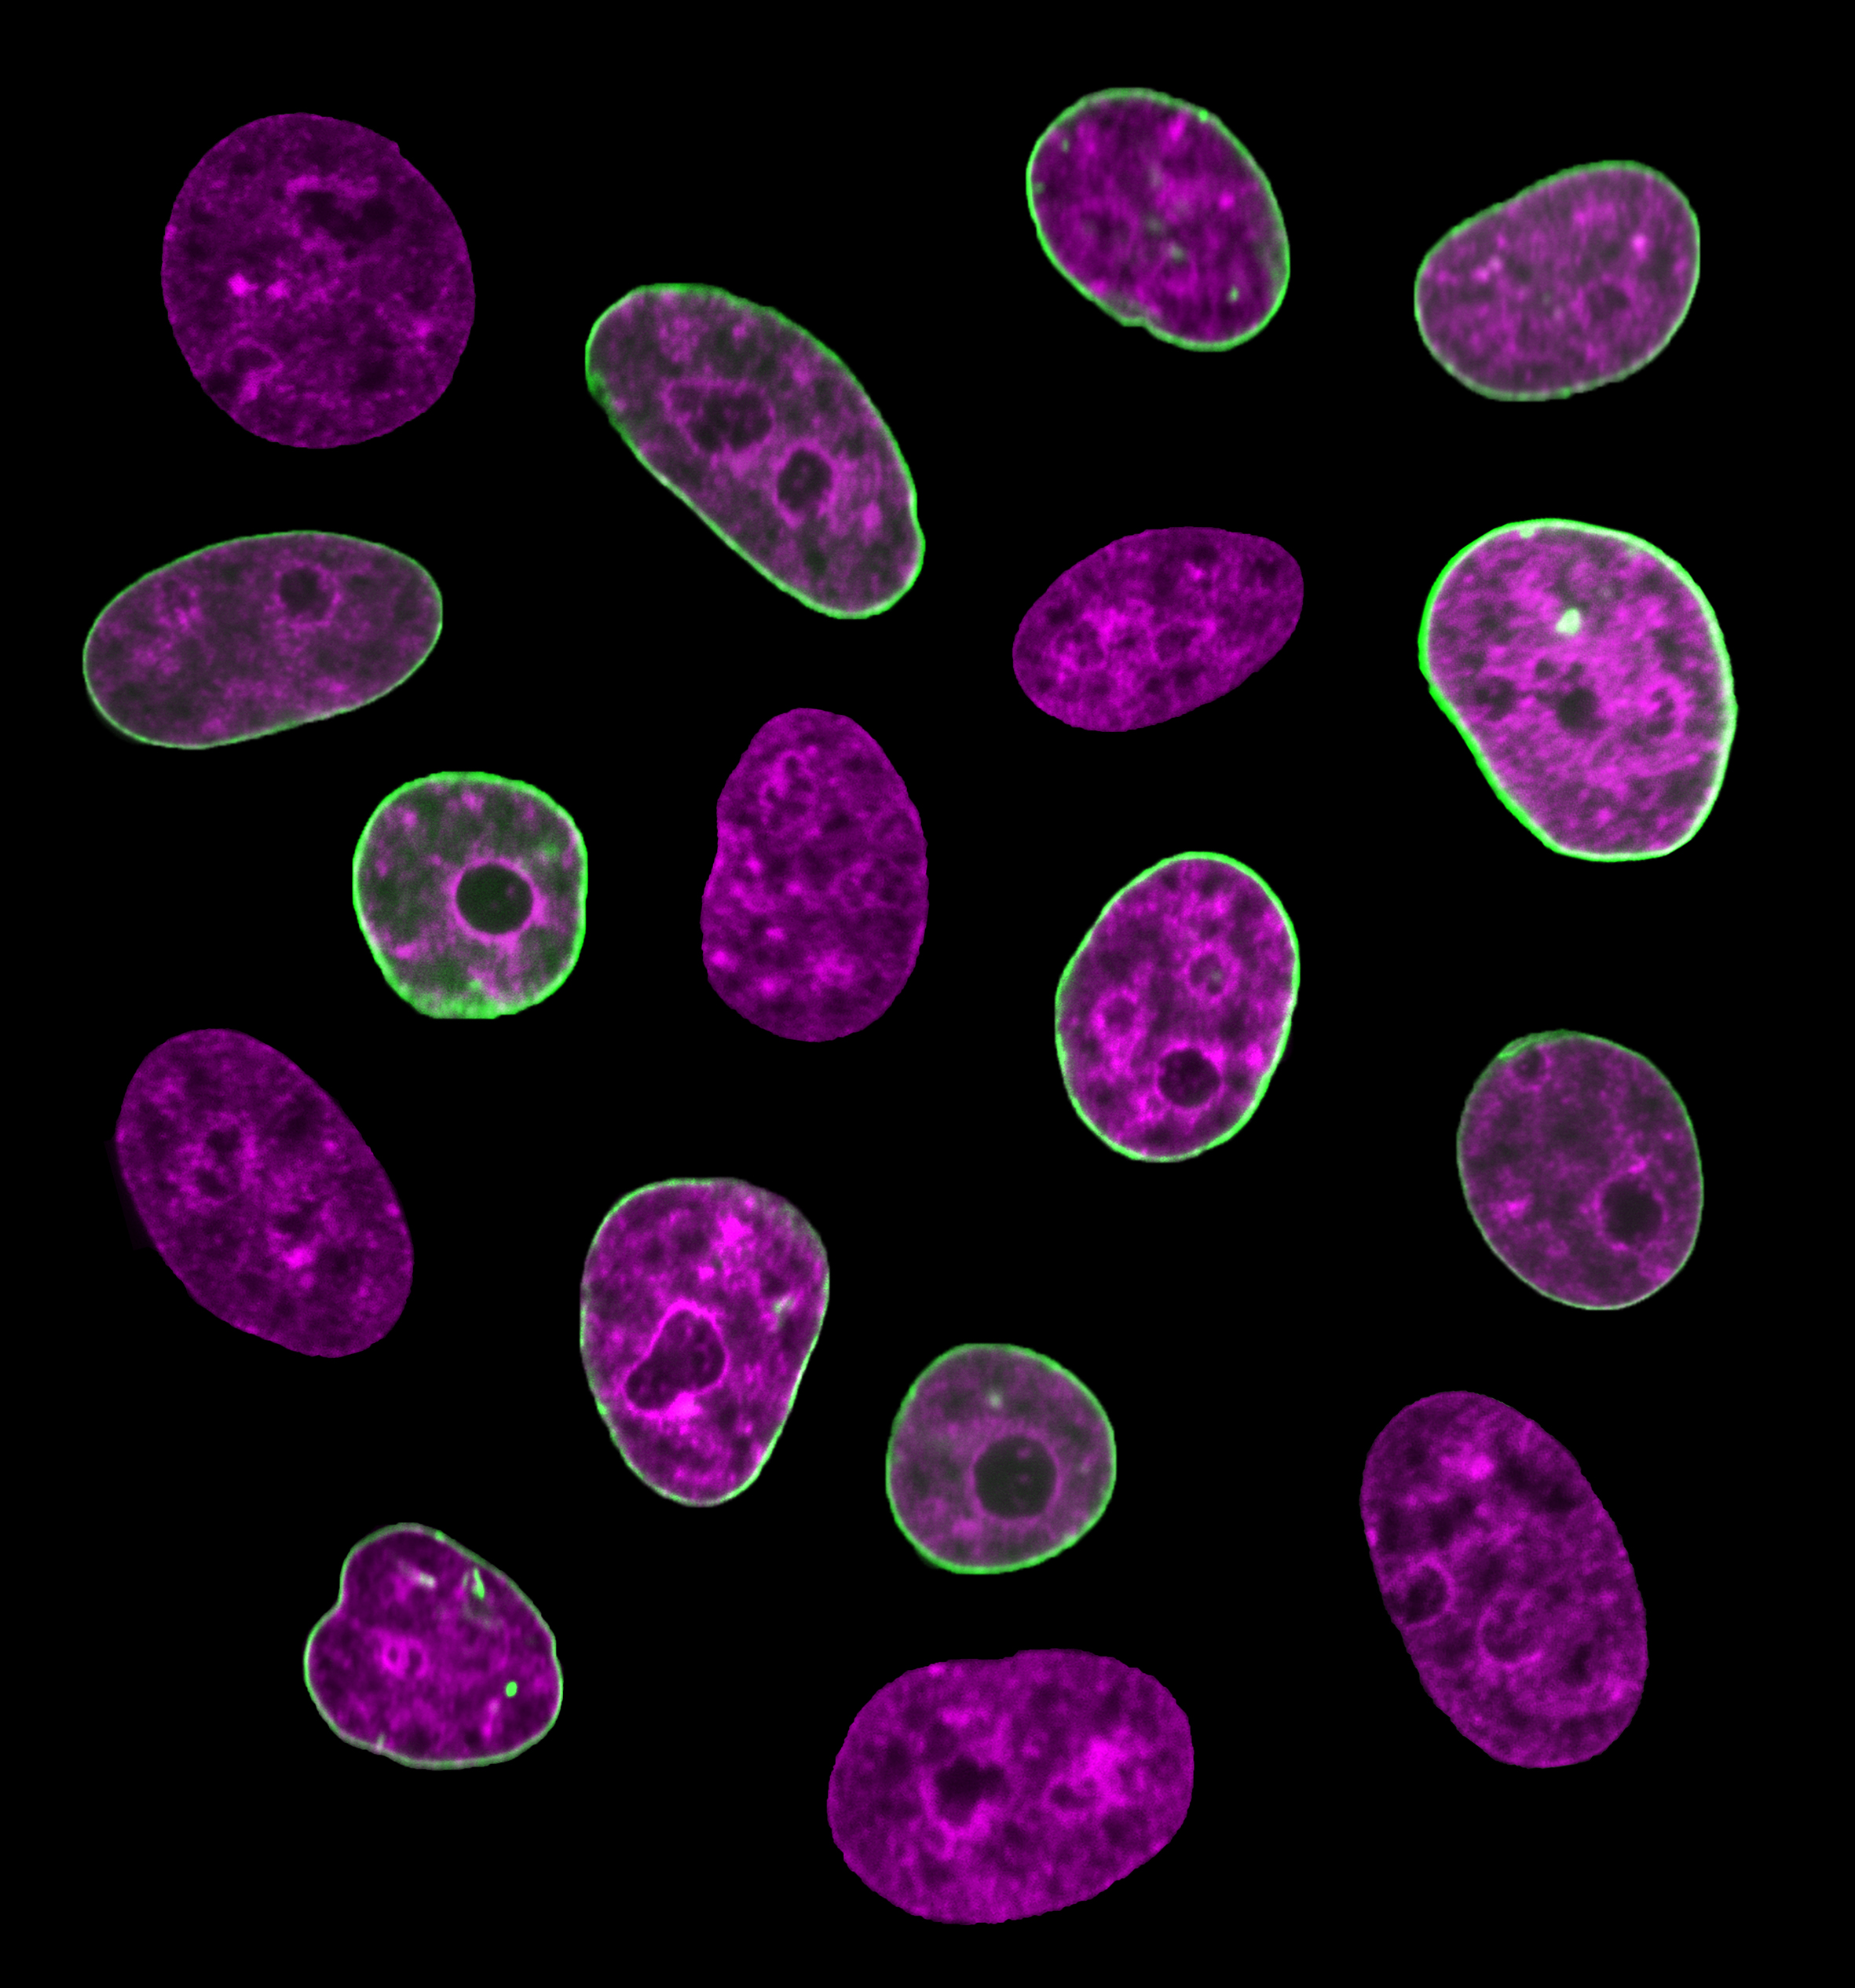 Human cell nuclei with fluorescently labeled chromatin (purple) and nuclear envelope (green).